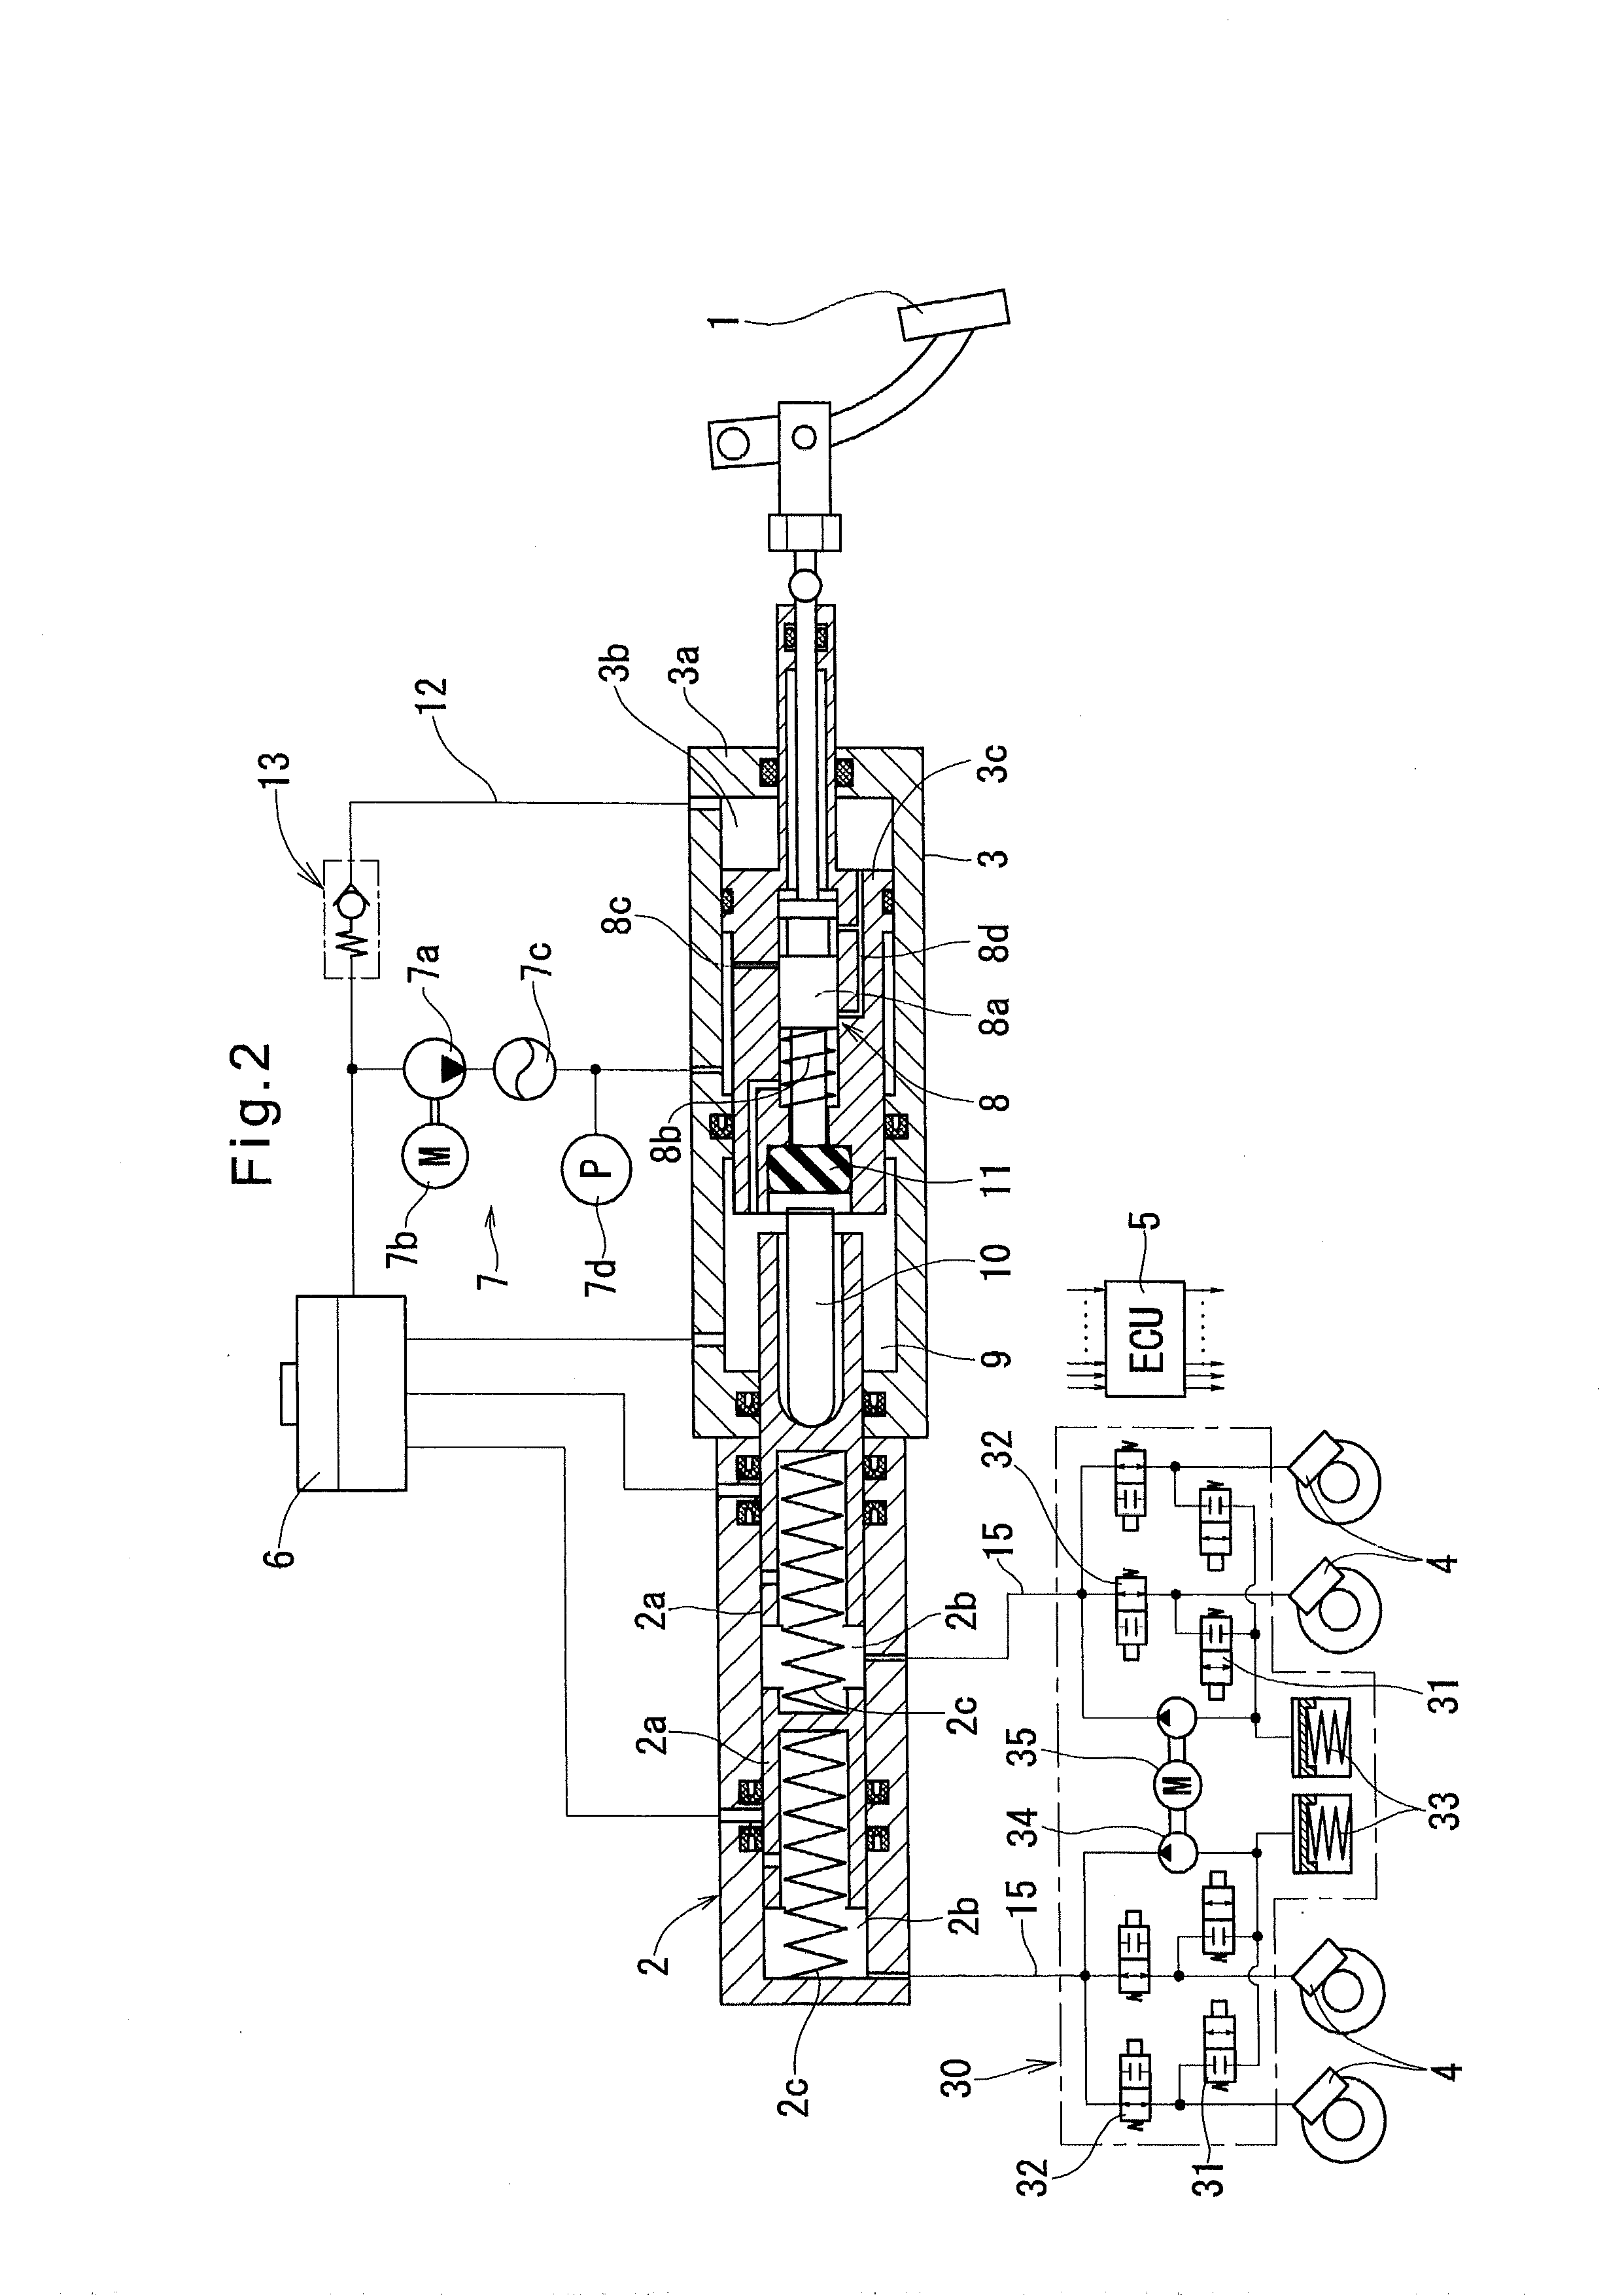 Hydraulic booster and hydraulic brake system using the same